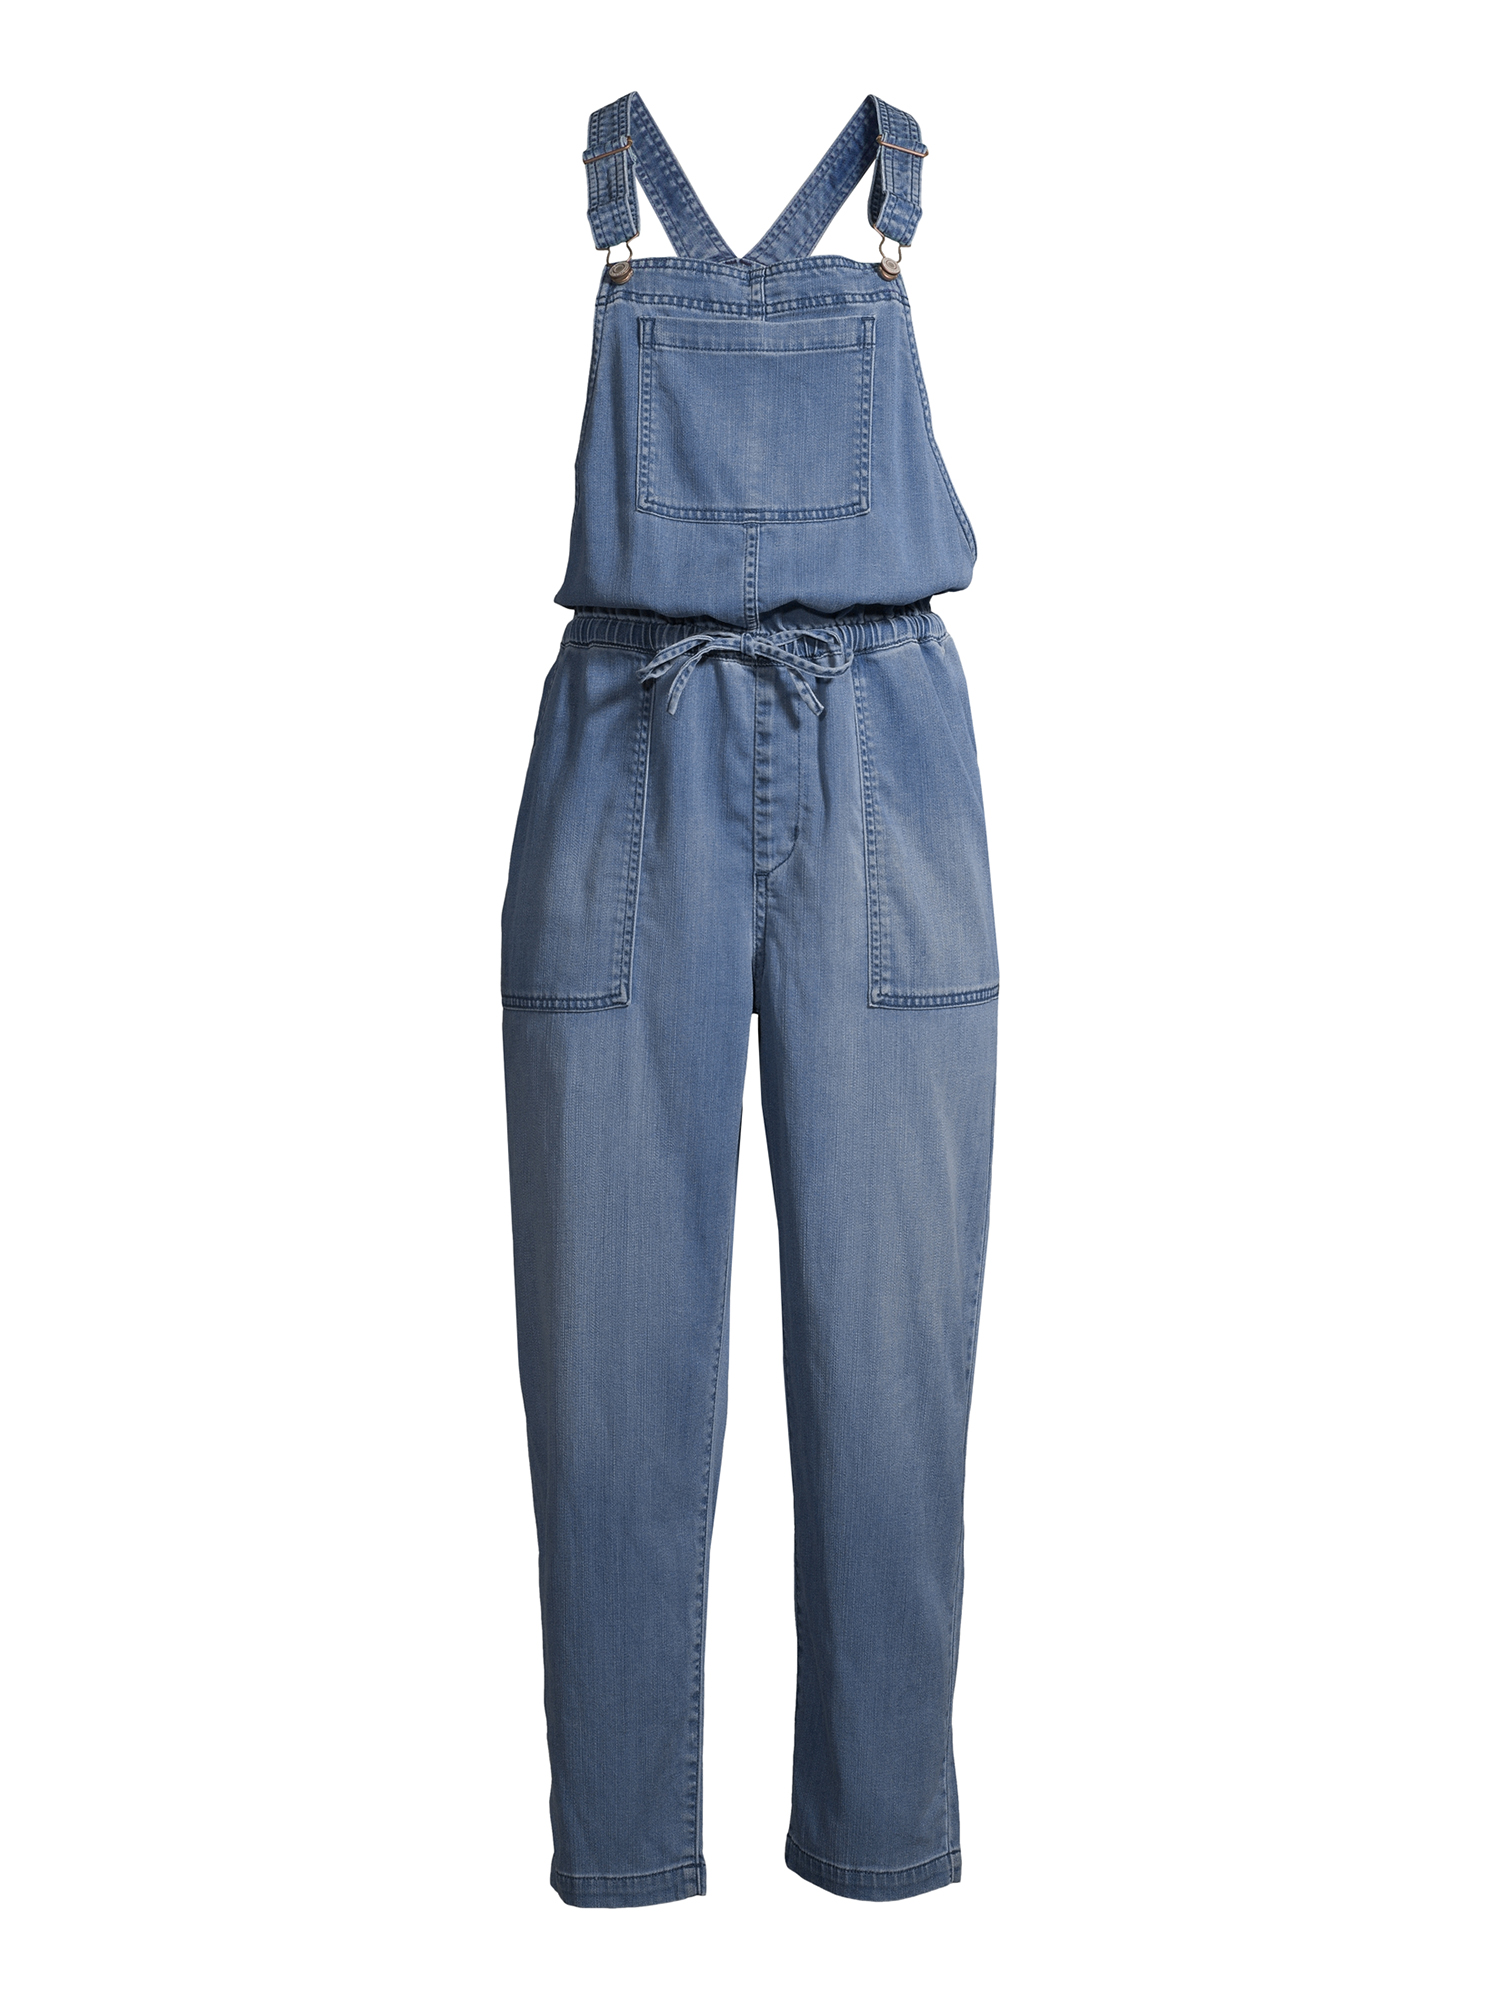 Time and Tru Women's Lightweight Soft Overalls - image 6 of 6